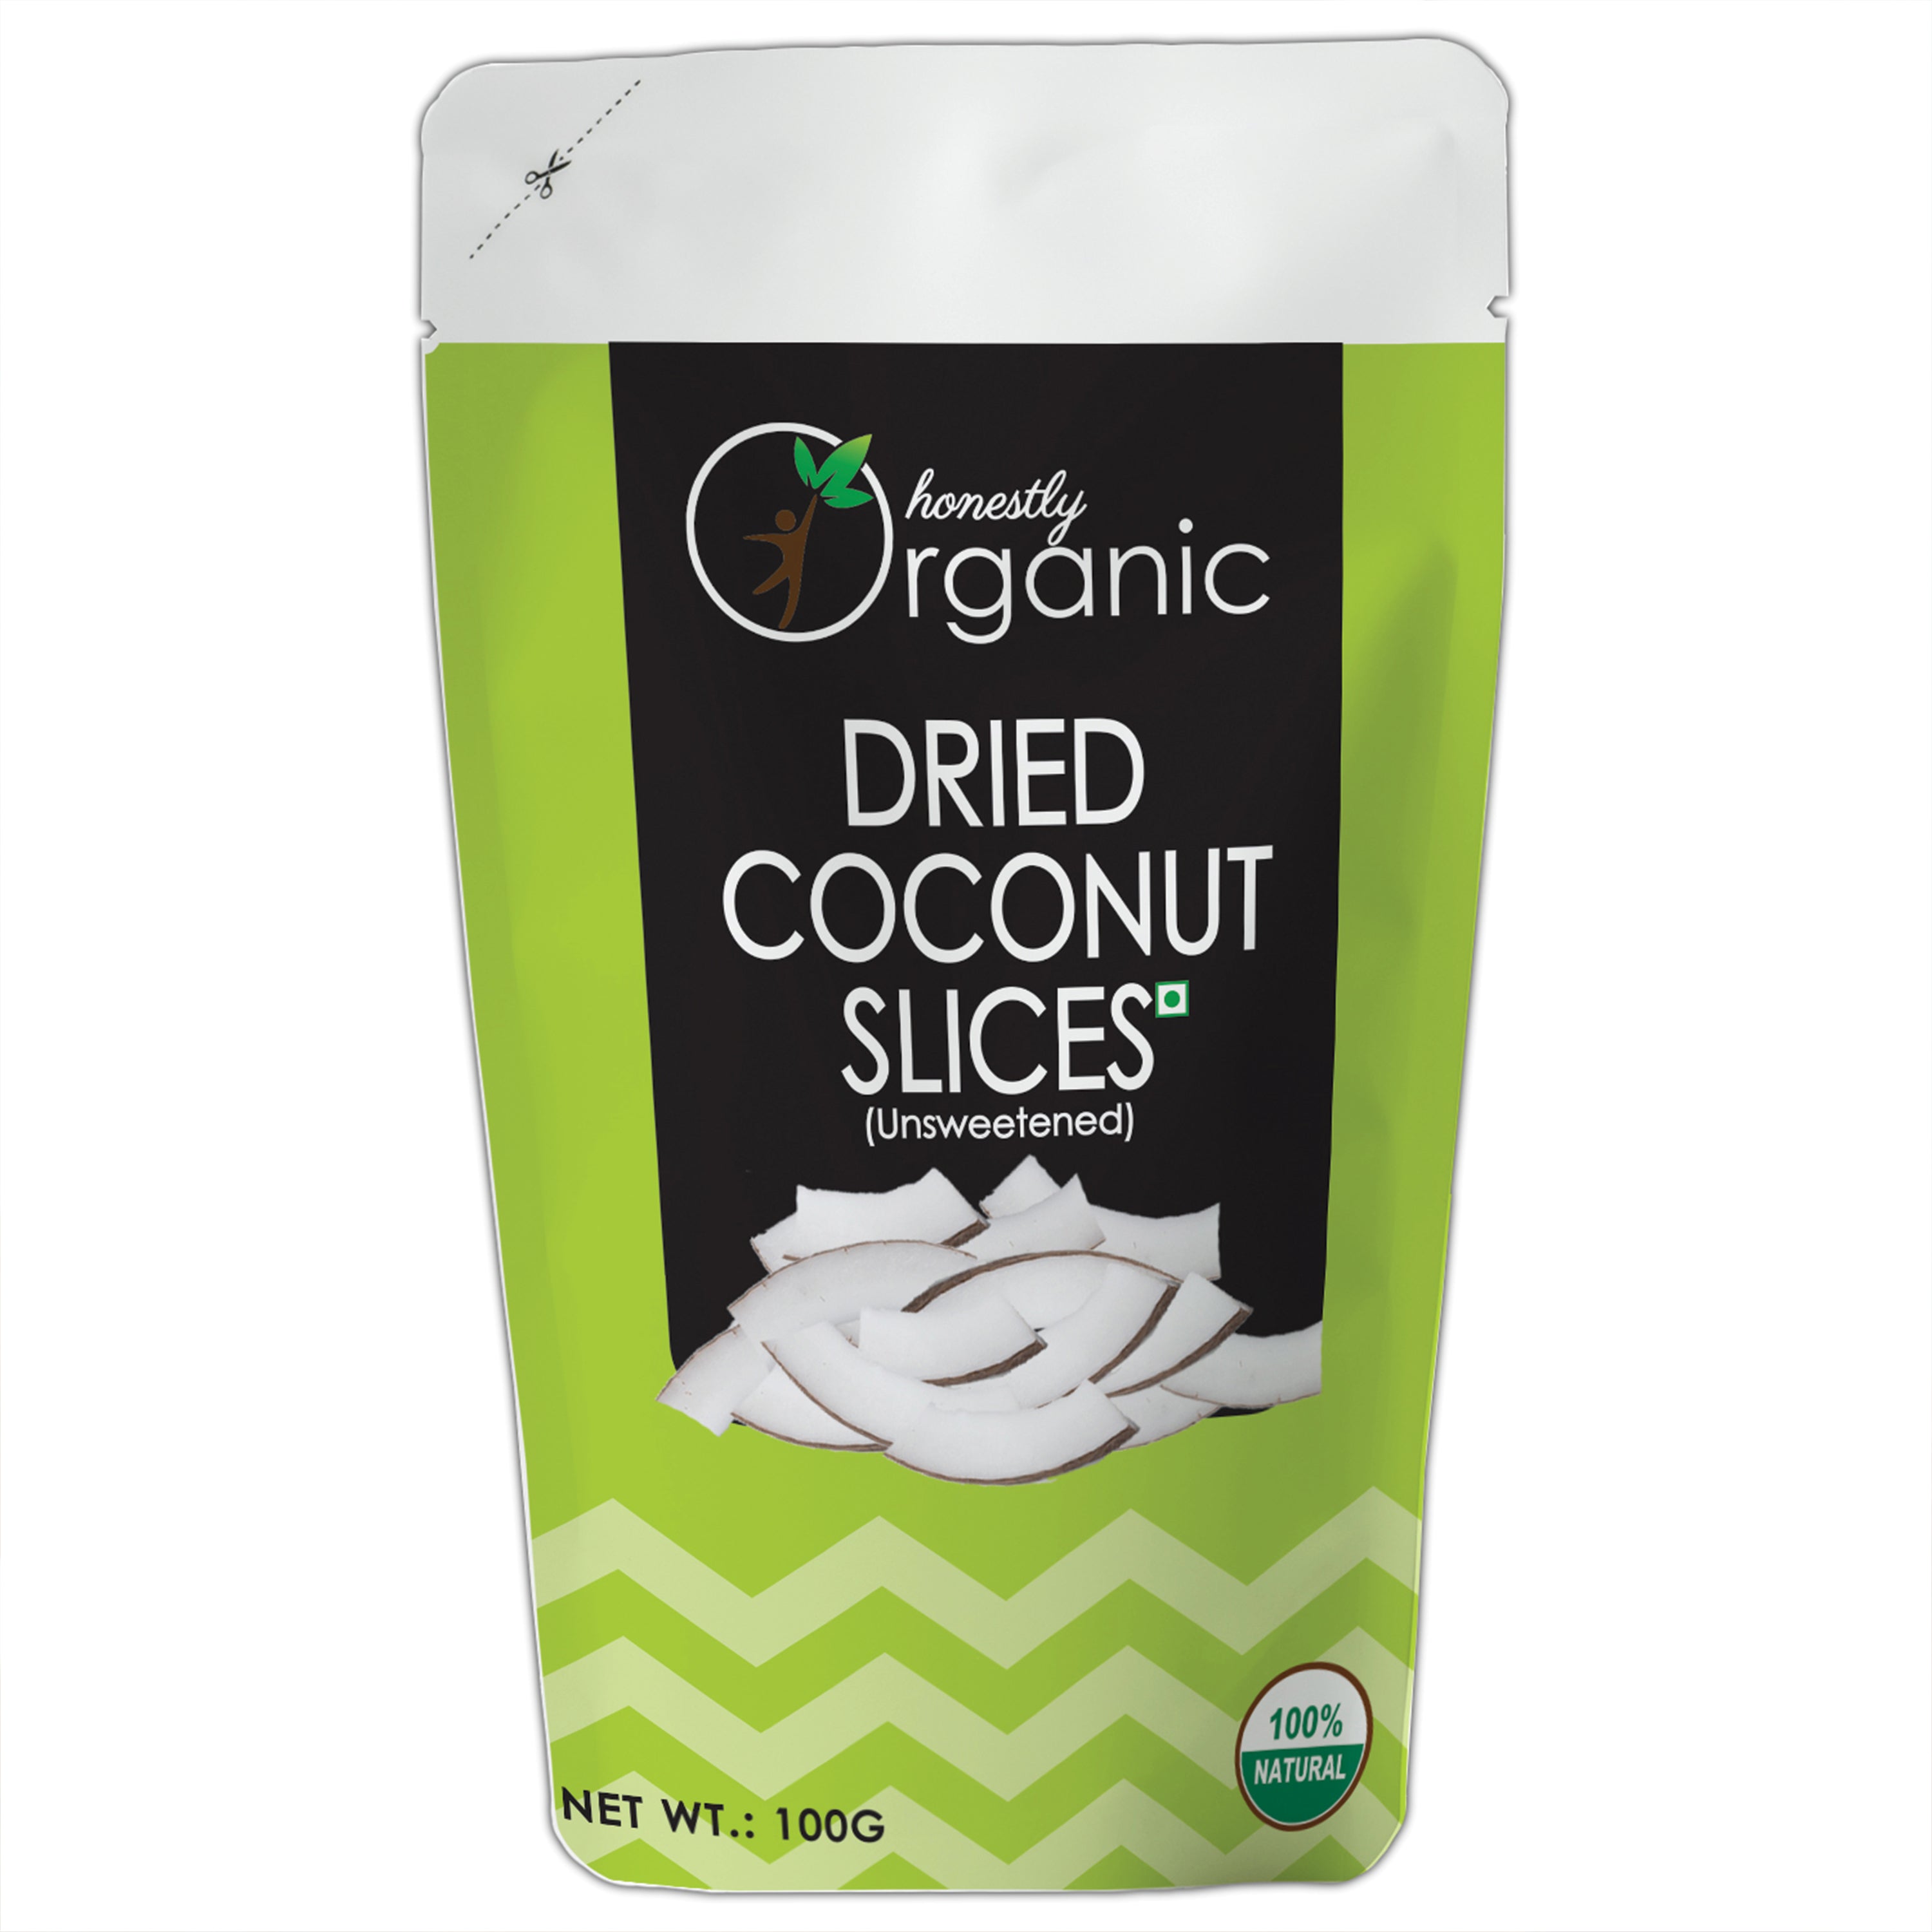 D-Alive Honestly Organic Dried Coconut Slices - 100g